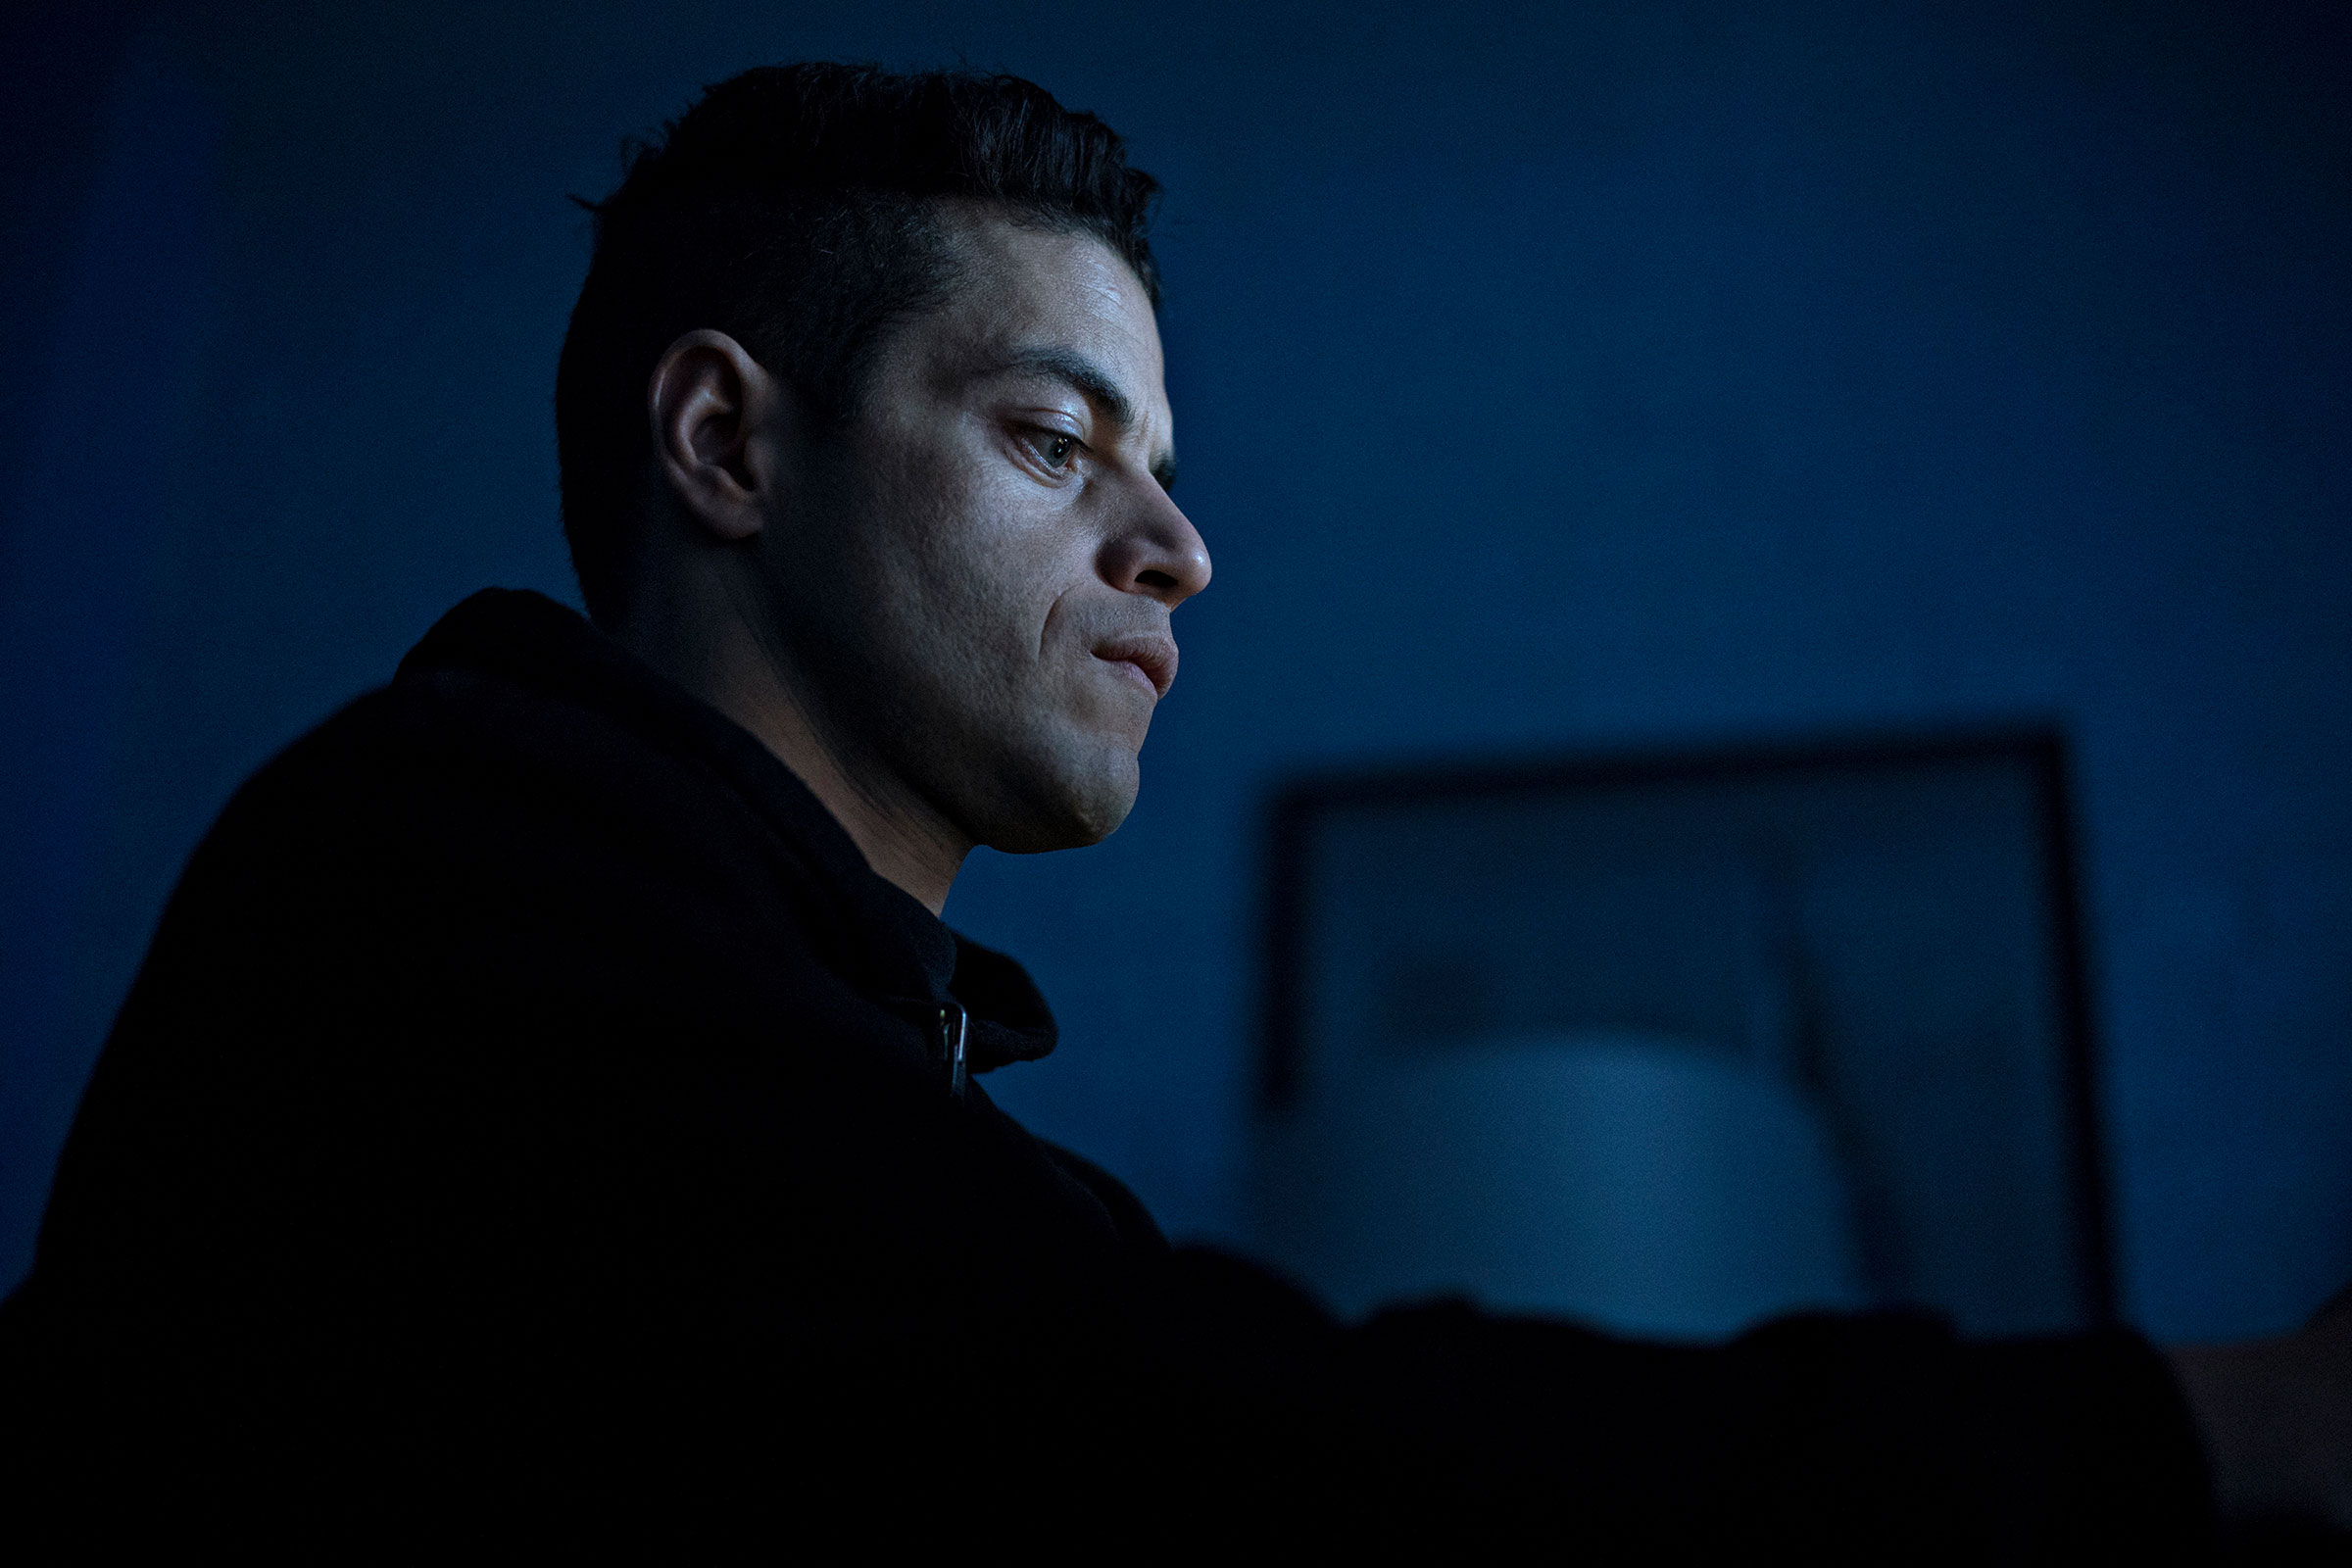 materiale grill Opsætning Mr. Robot Series Finale (Part 1 & 2) recap: Elliot discovers the truth